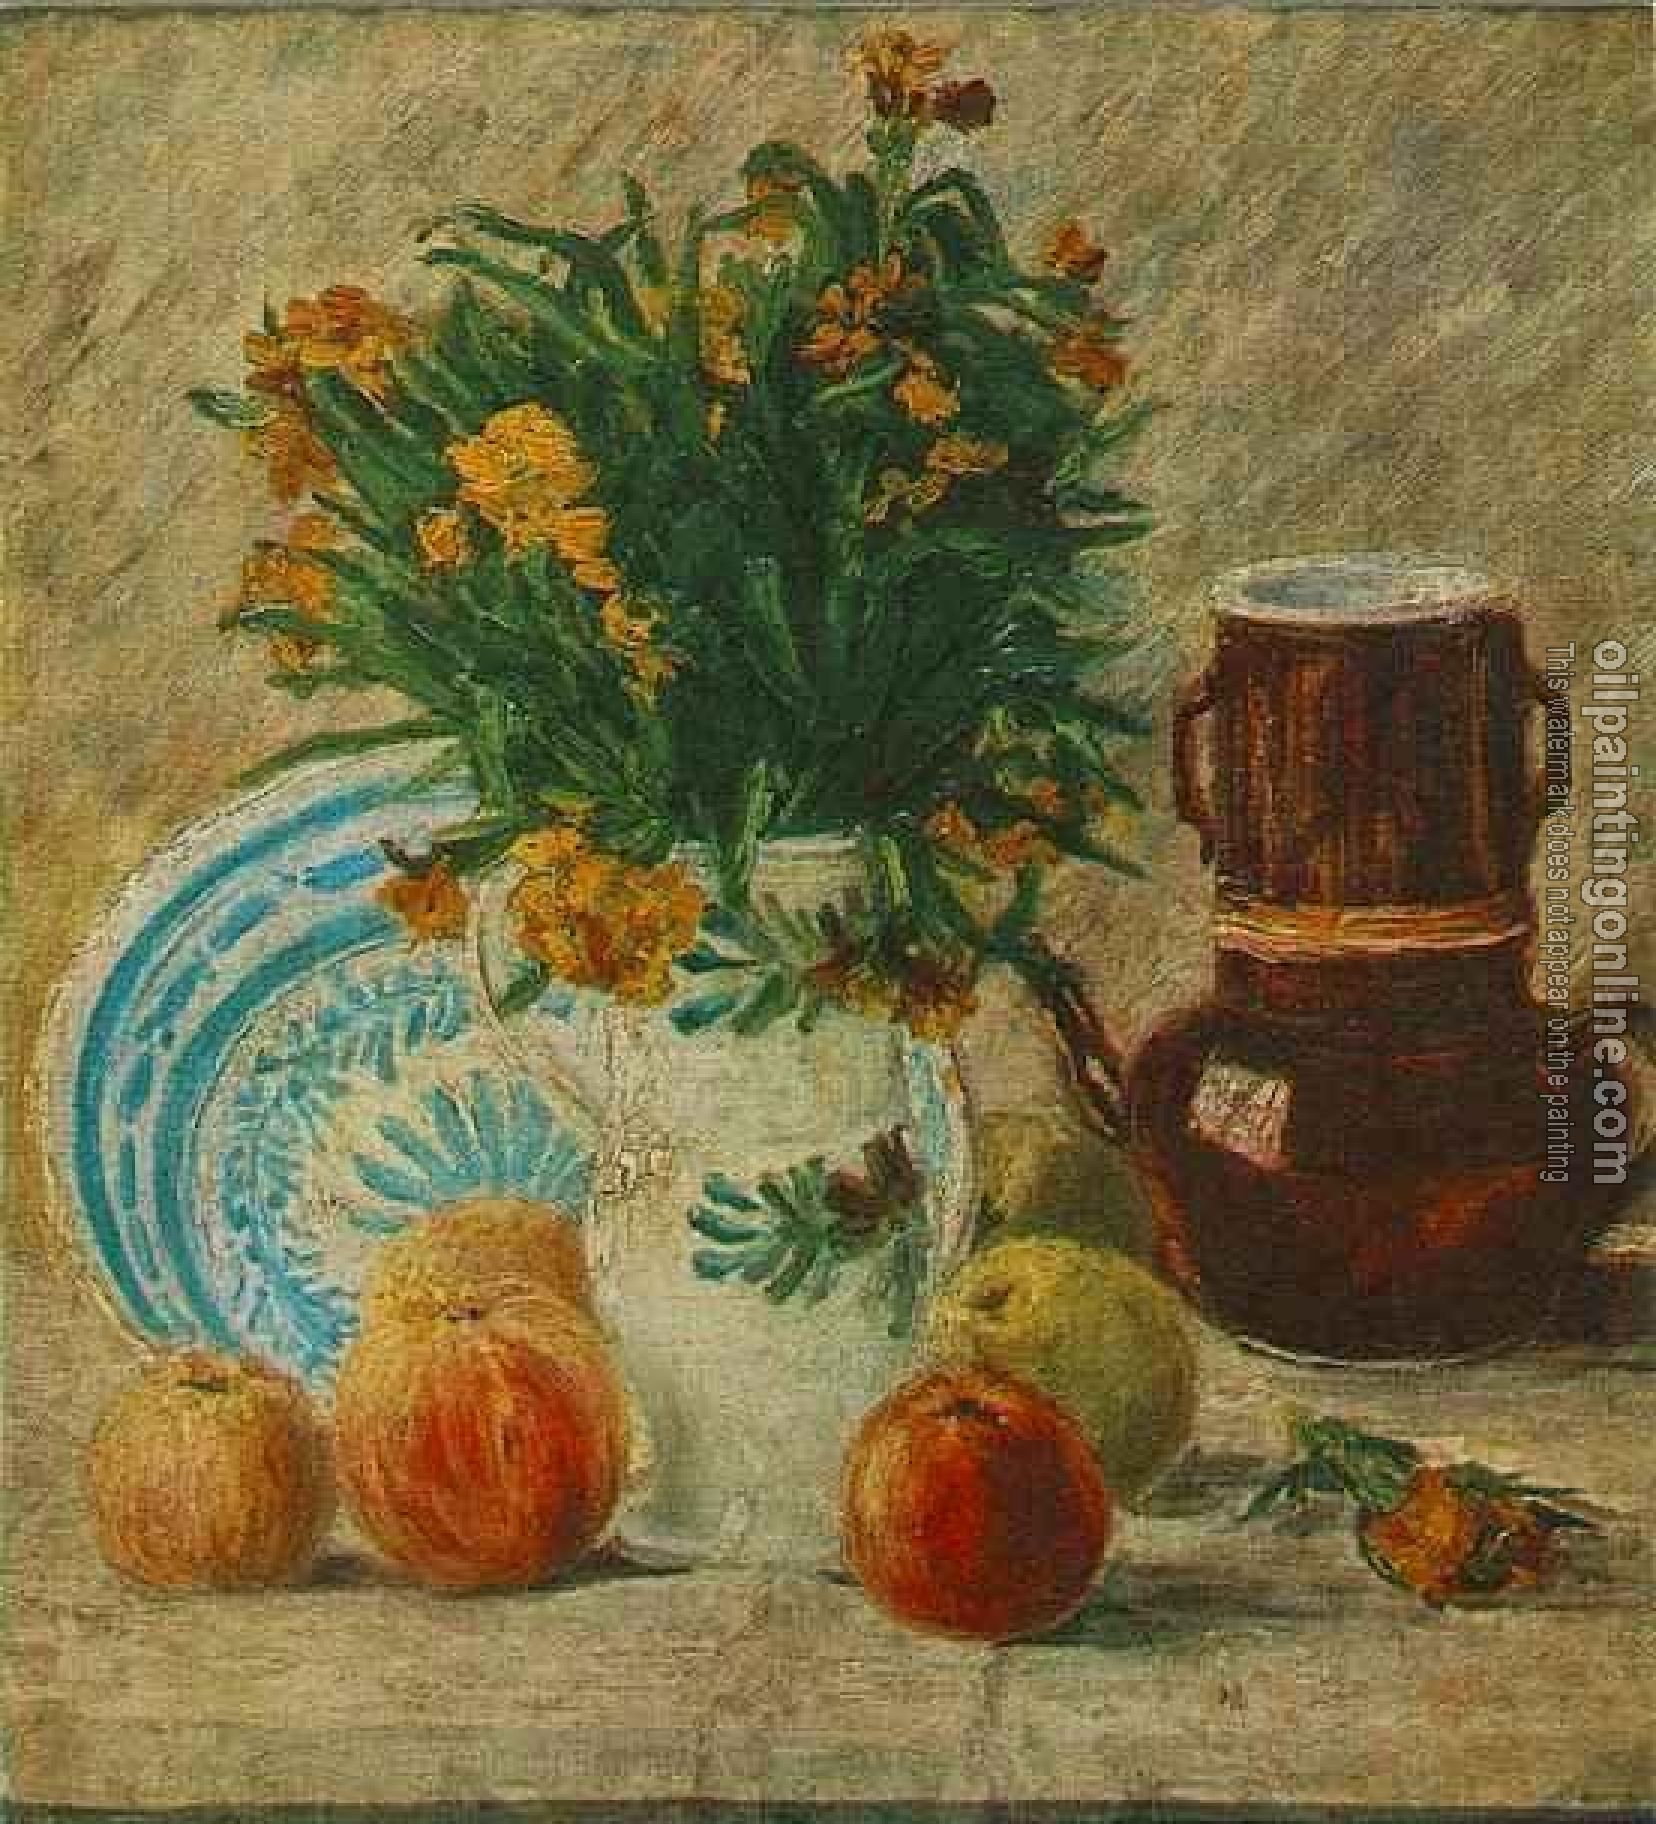 Gogh, Vincent van - Vase with Flowers, Coffeepot and Fruit